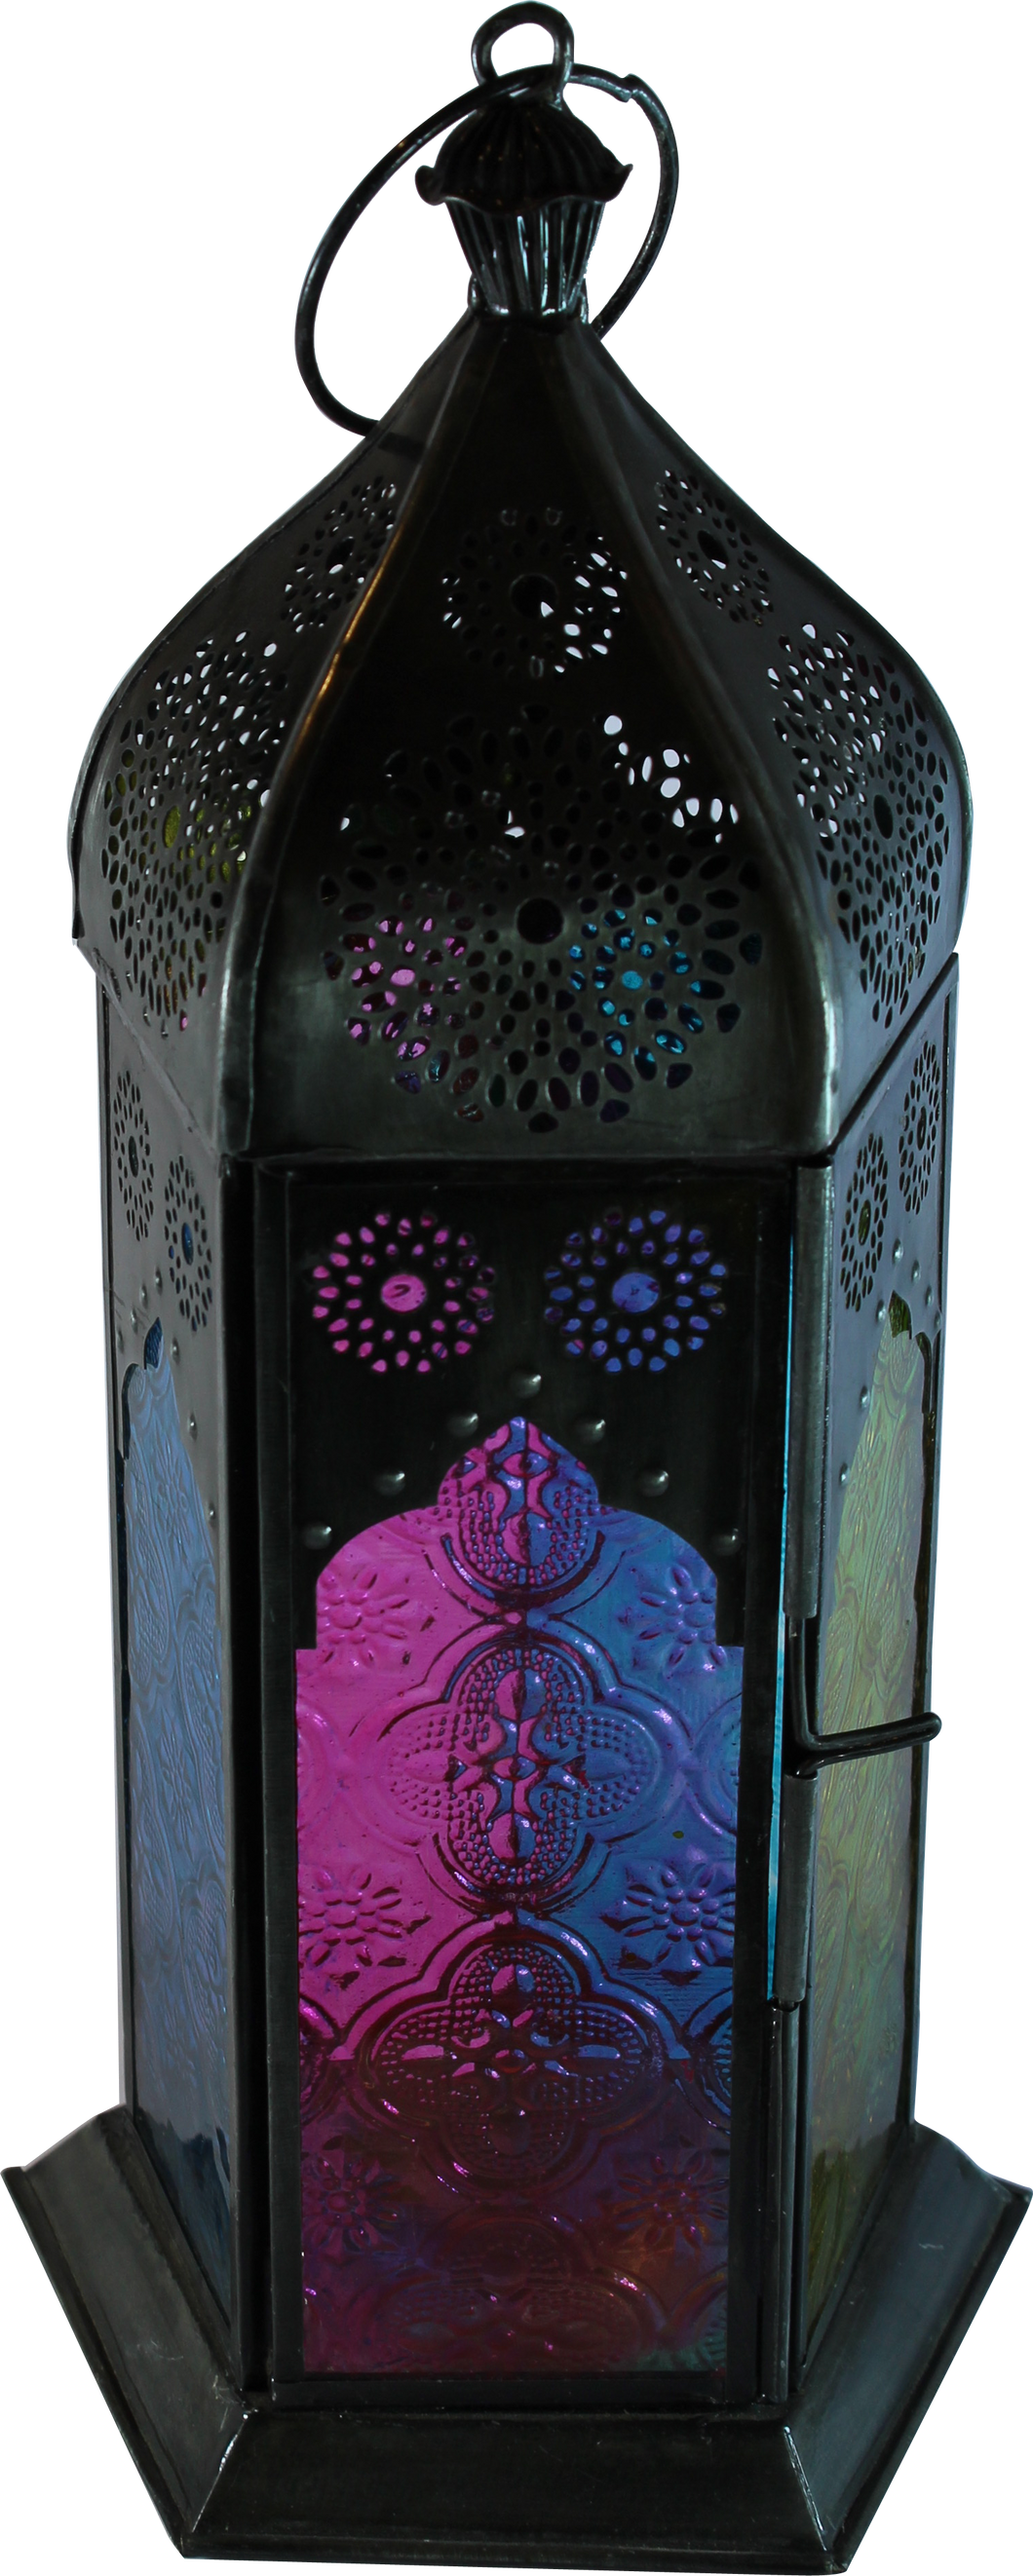 The Home Hanging Lantern Antique Multicolor G61